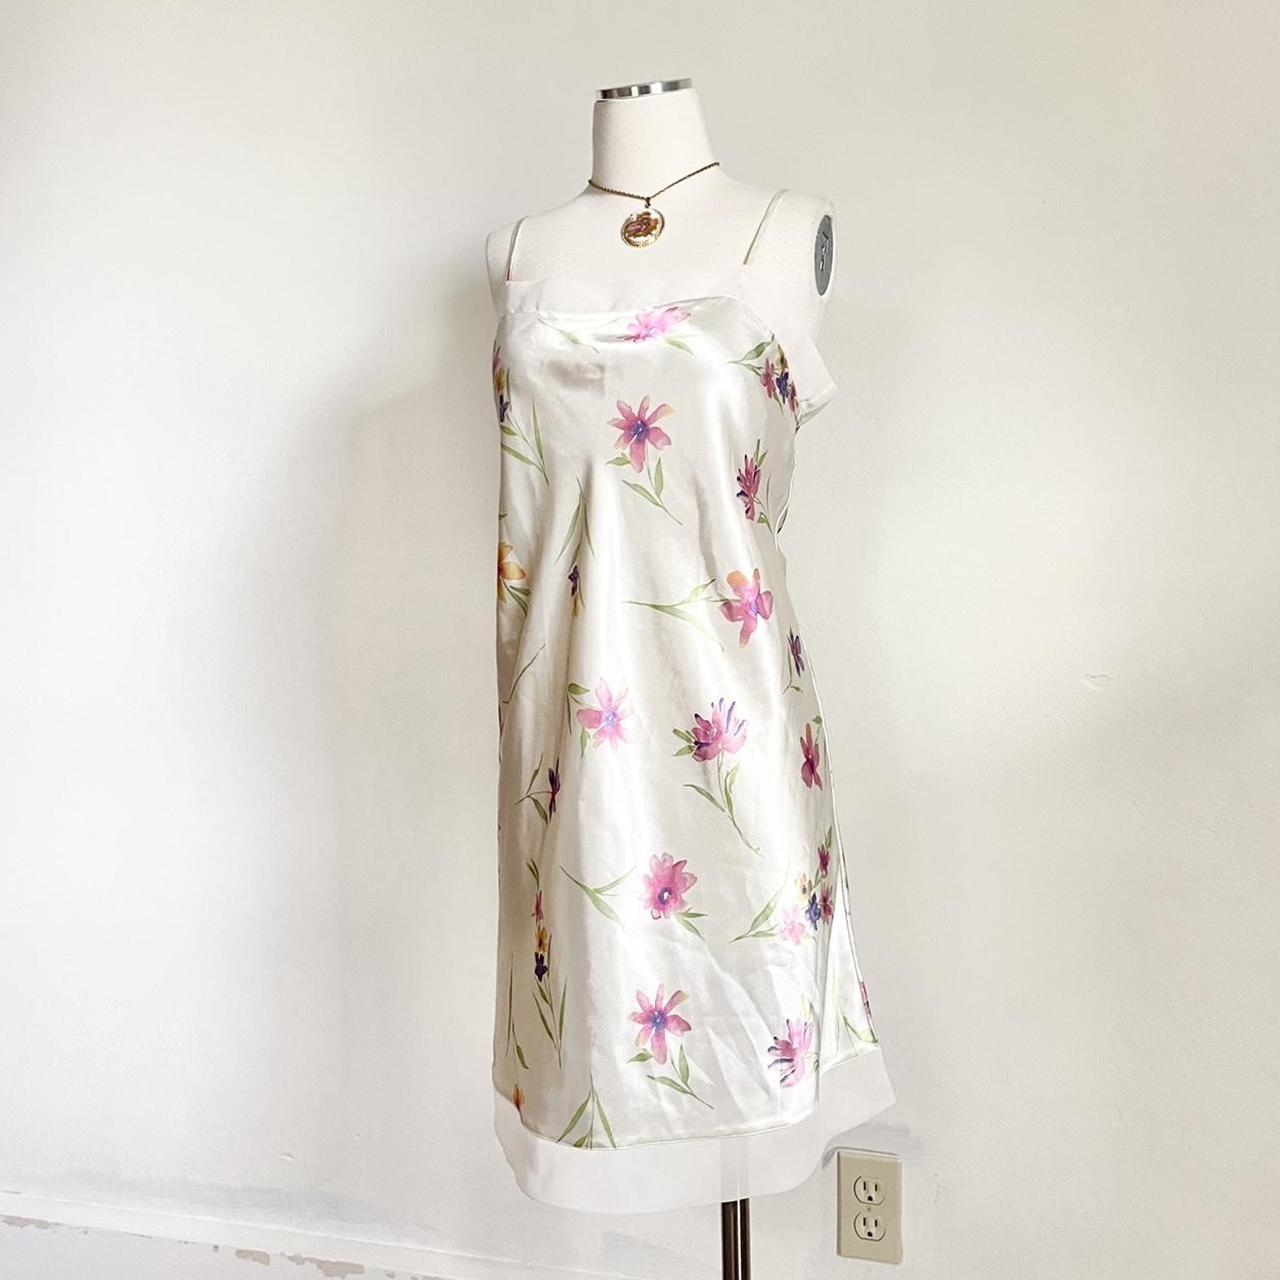 Women's White and Pink Dress | Depop